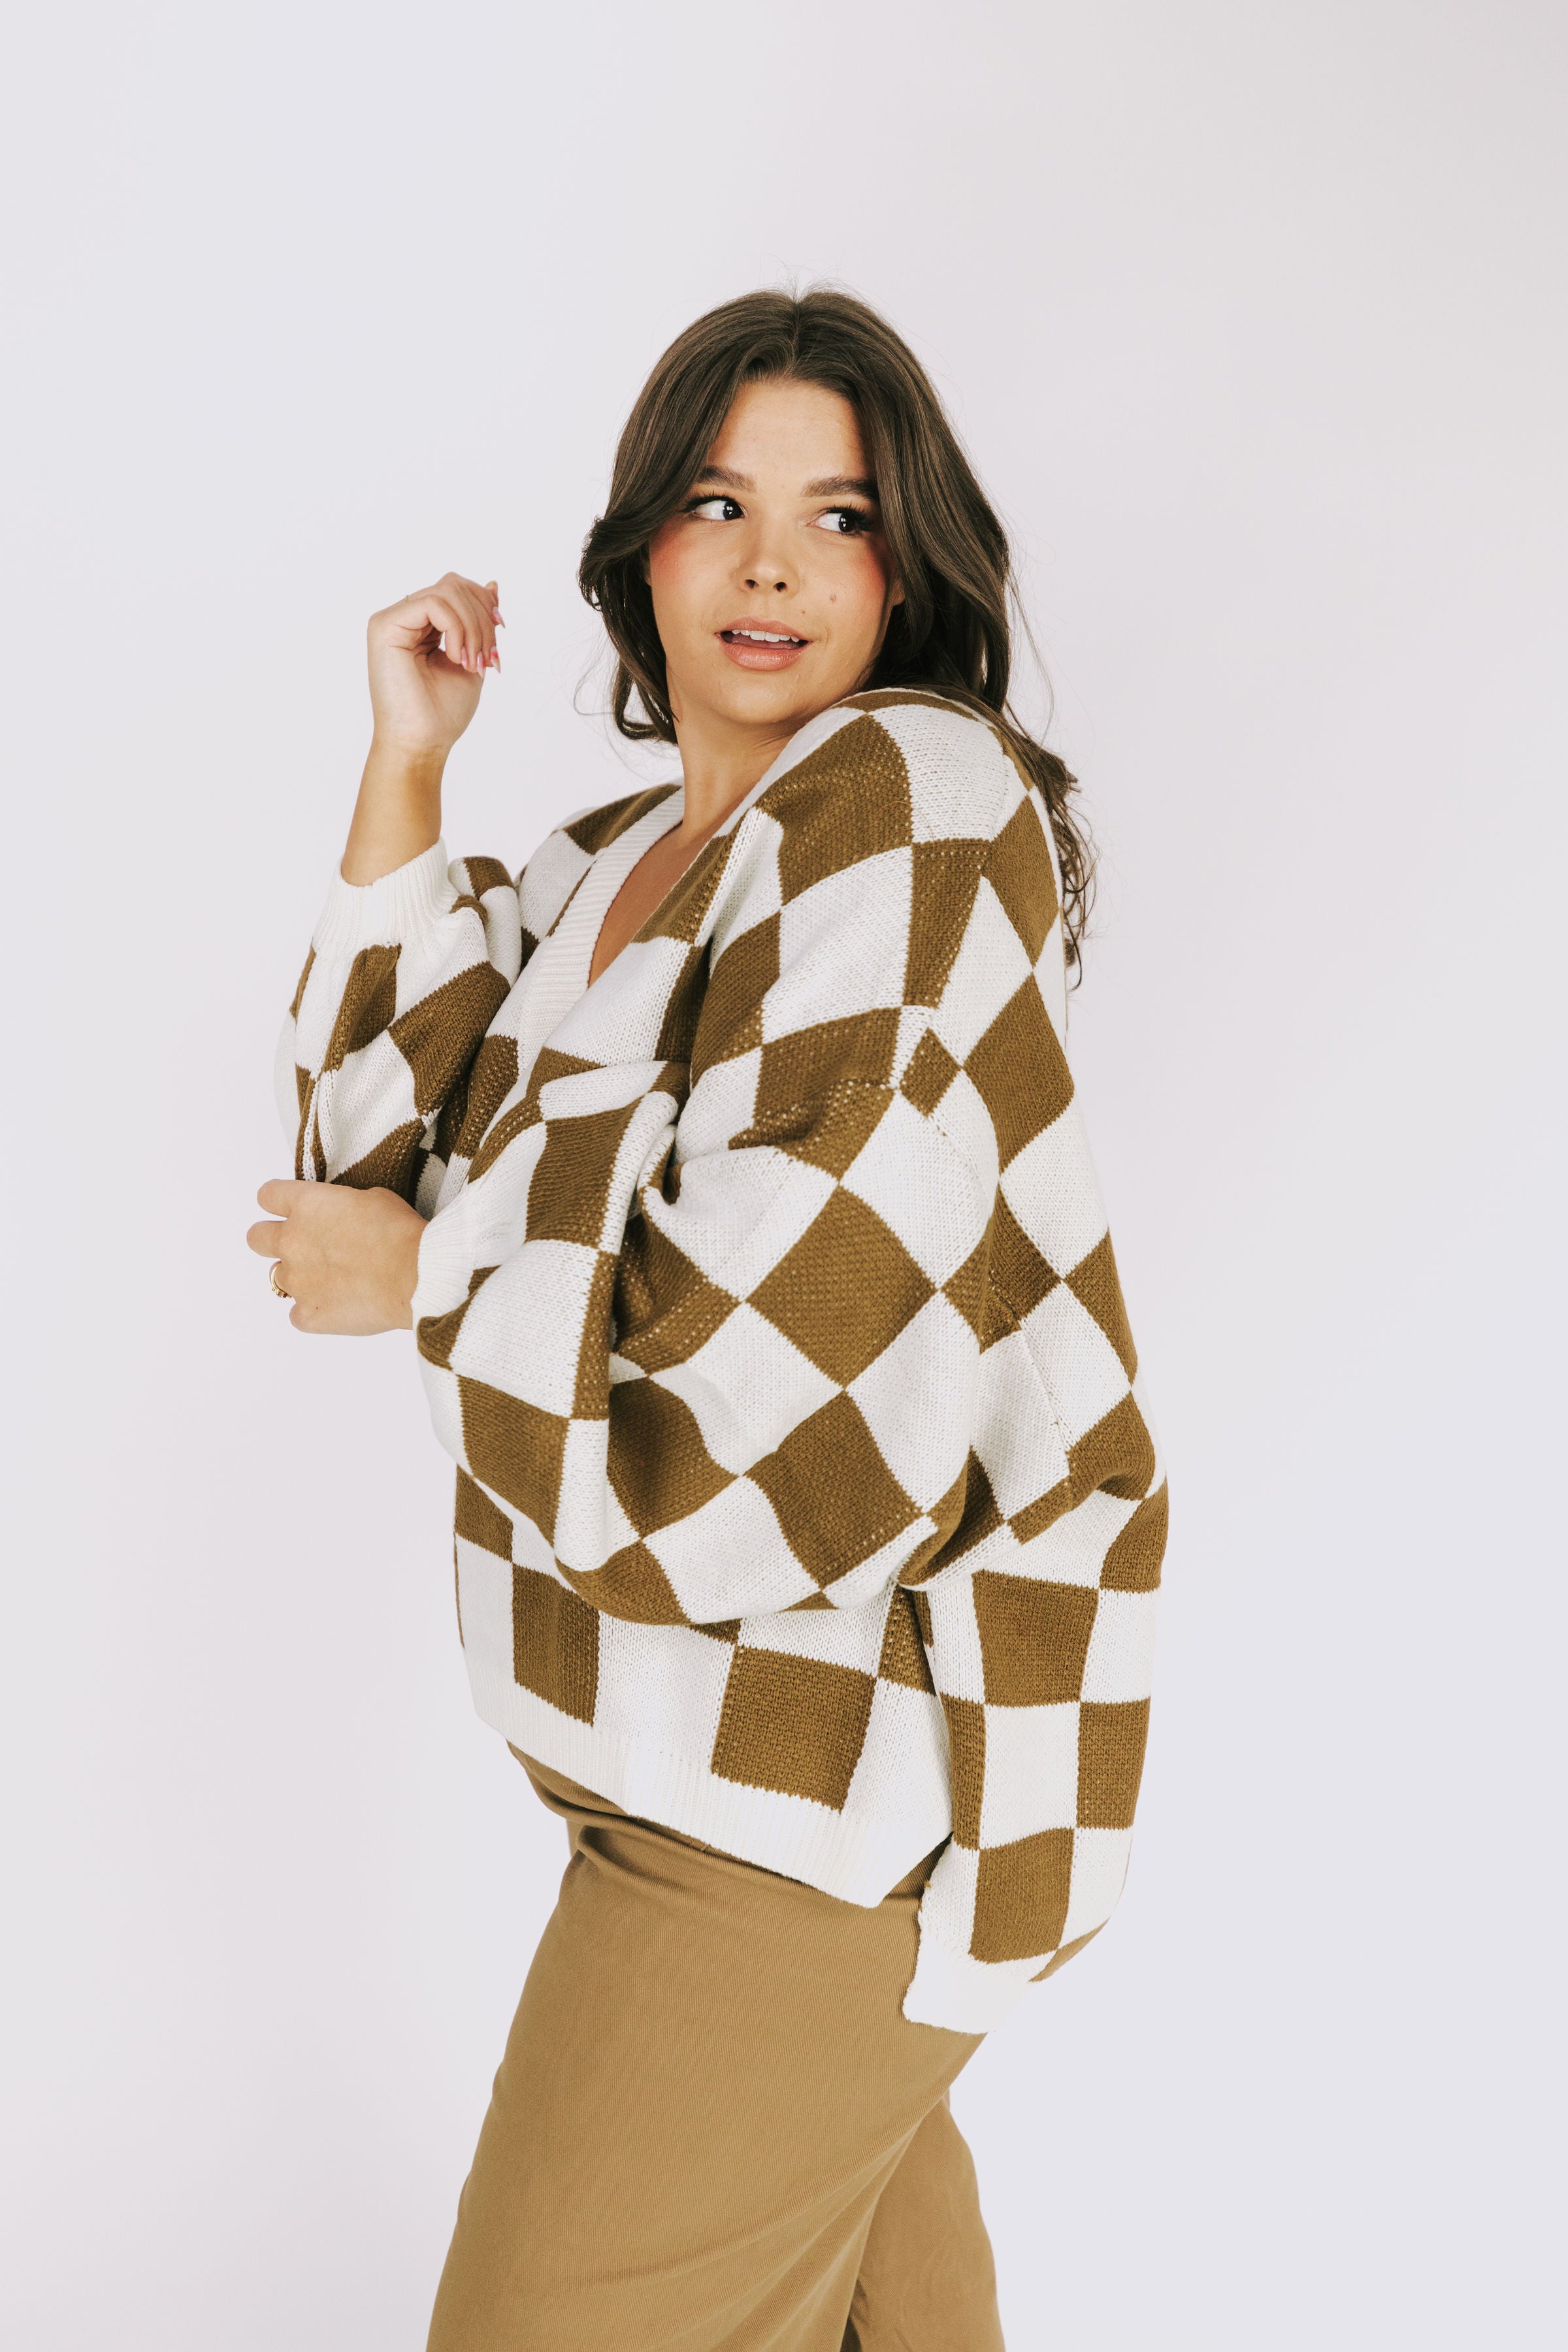 PLUS SIZE - On The Grid Sweater